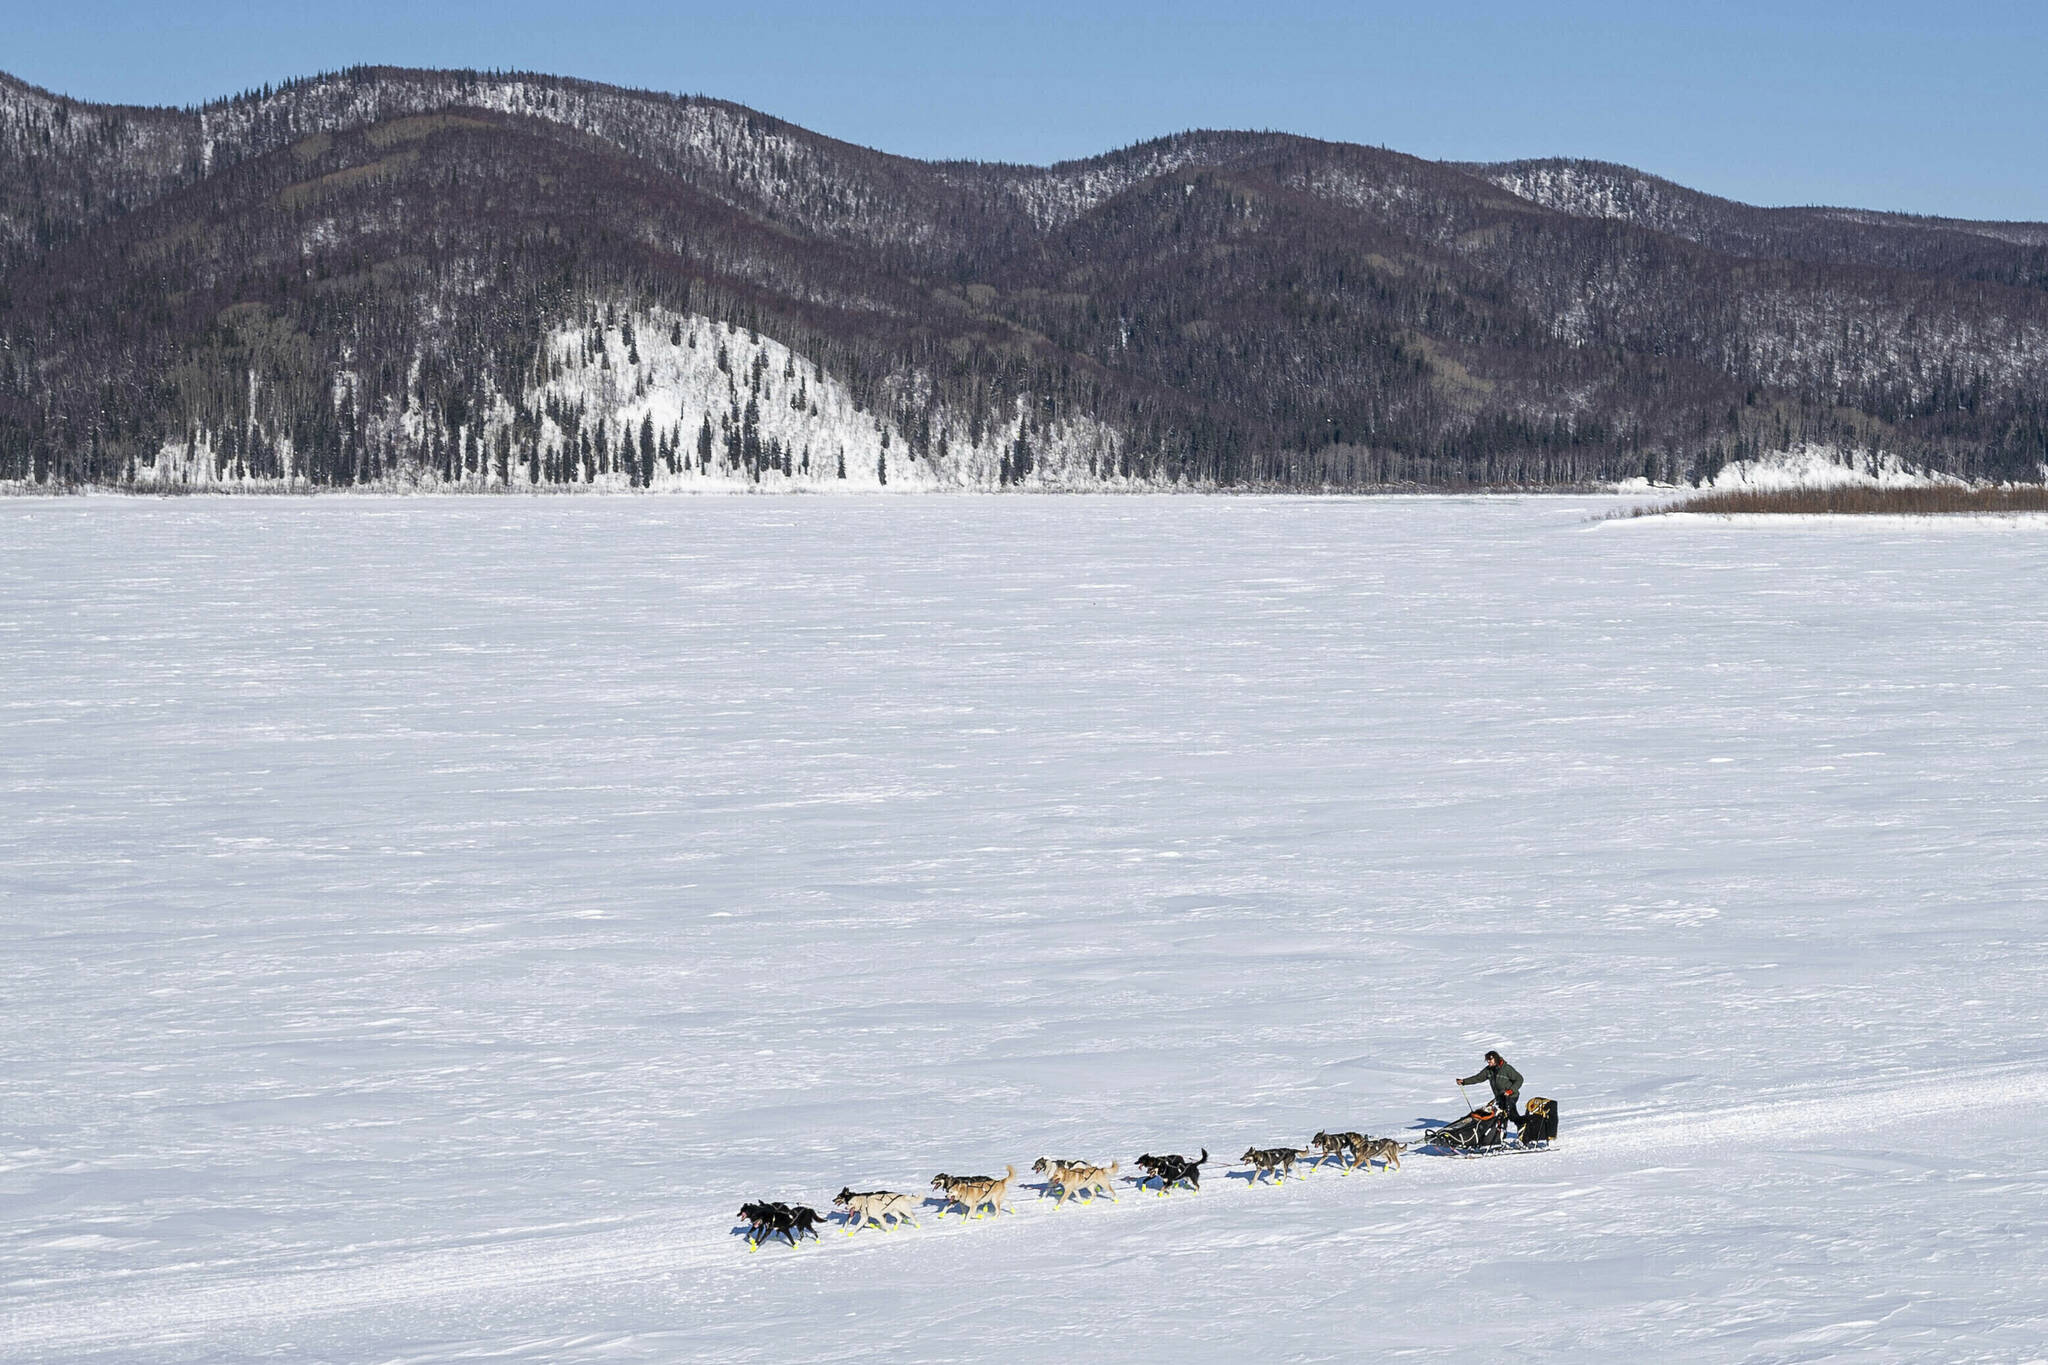 Brent Sass heads down the Yukon River between Ruby and Galena, Alaska, on March 13, 2020, during the Iditarod Trail Sled Dog Race. Only 33 mushers will participate in the ceremonial start of the Iditarod on Saturday, March 4, the smallest field ever. (Loren Holmes/Anchorage Daily News via AP, File)